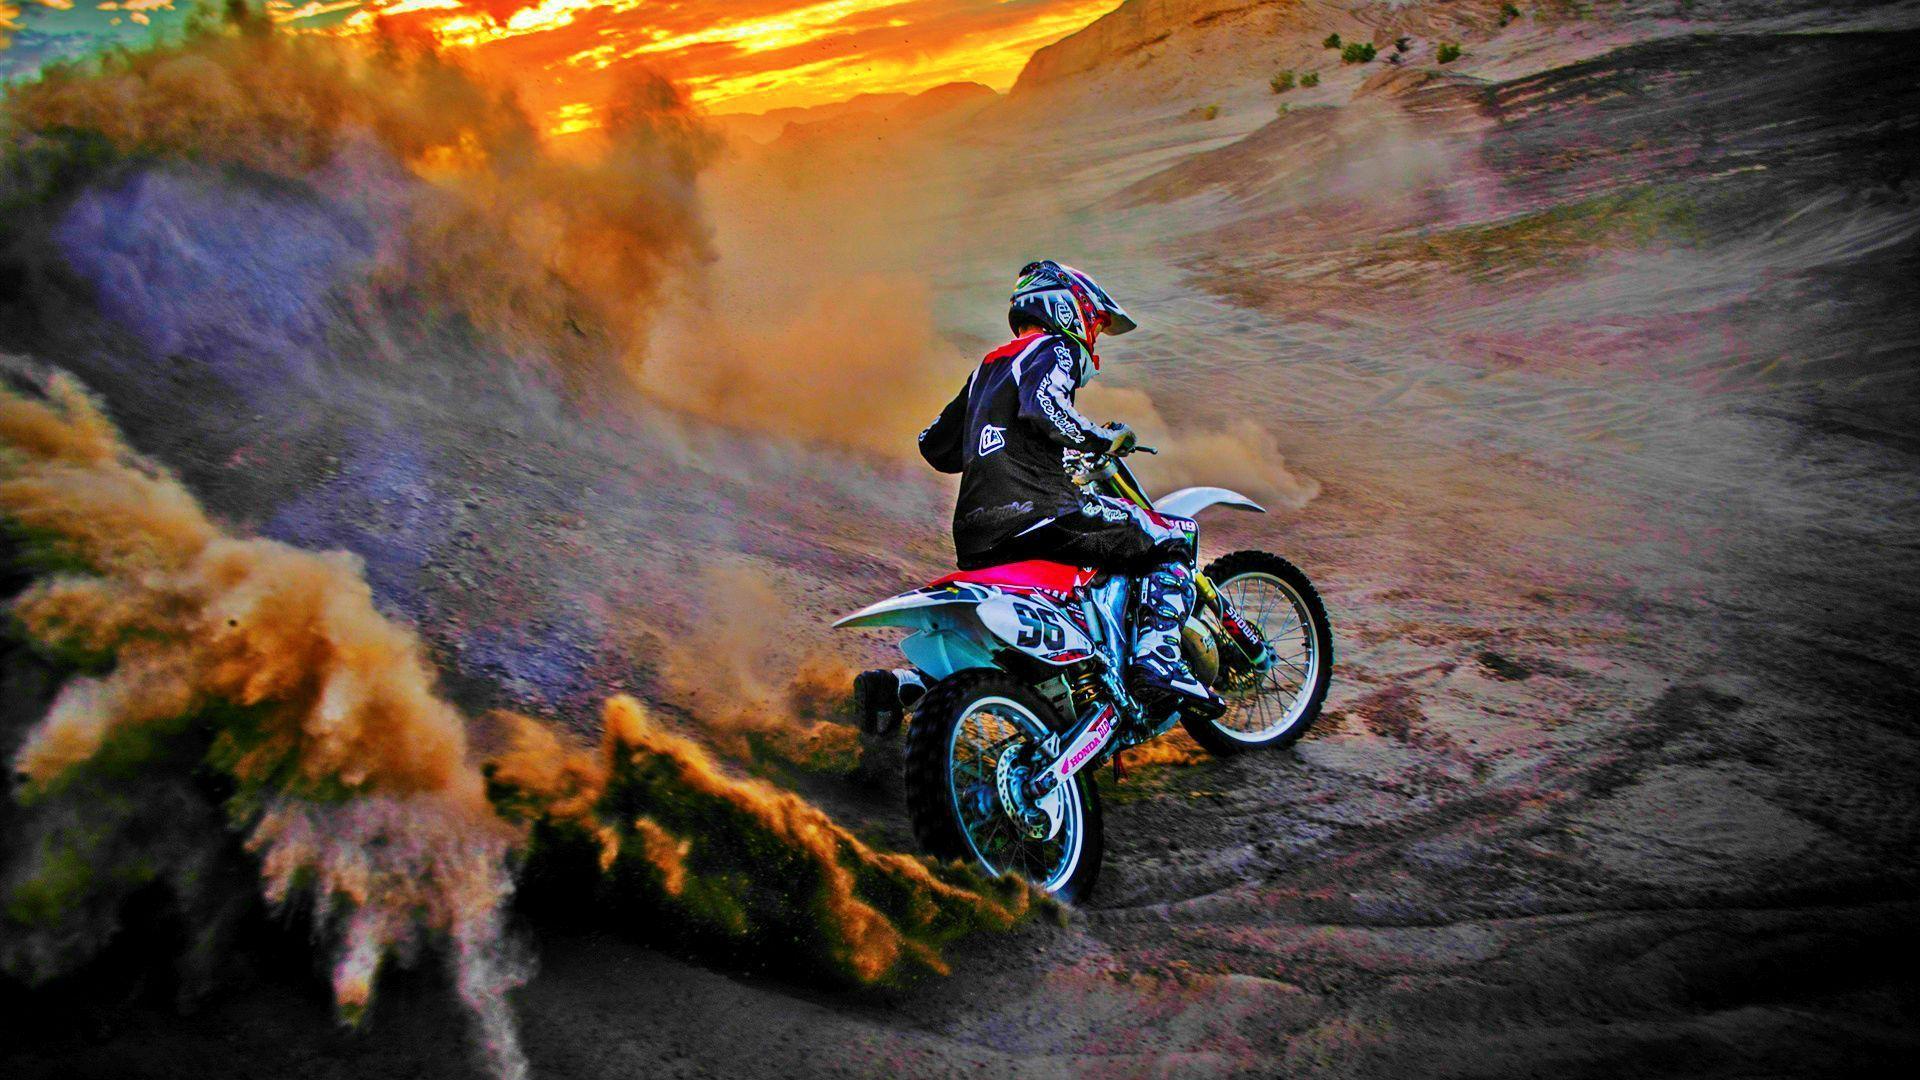 Freestyle Motocross Extreme. See the complete BuzzTrakr Video Page